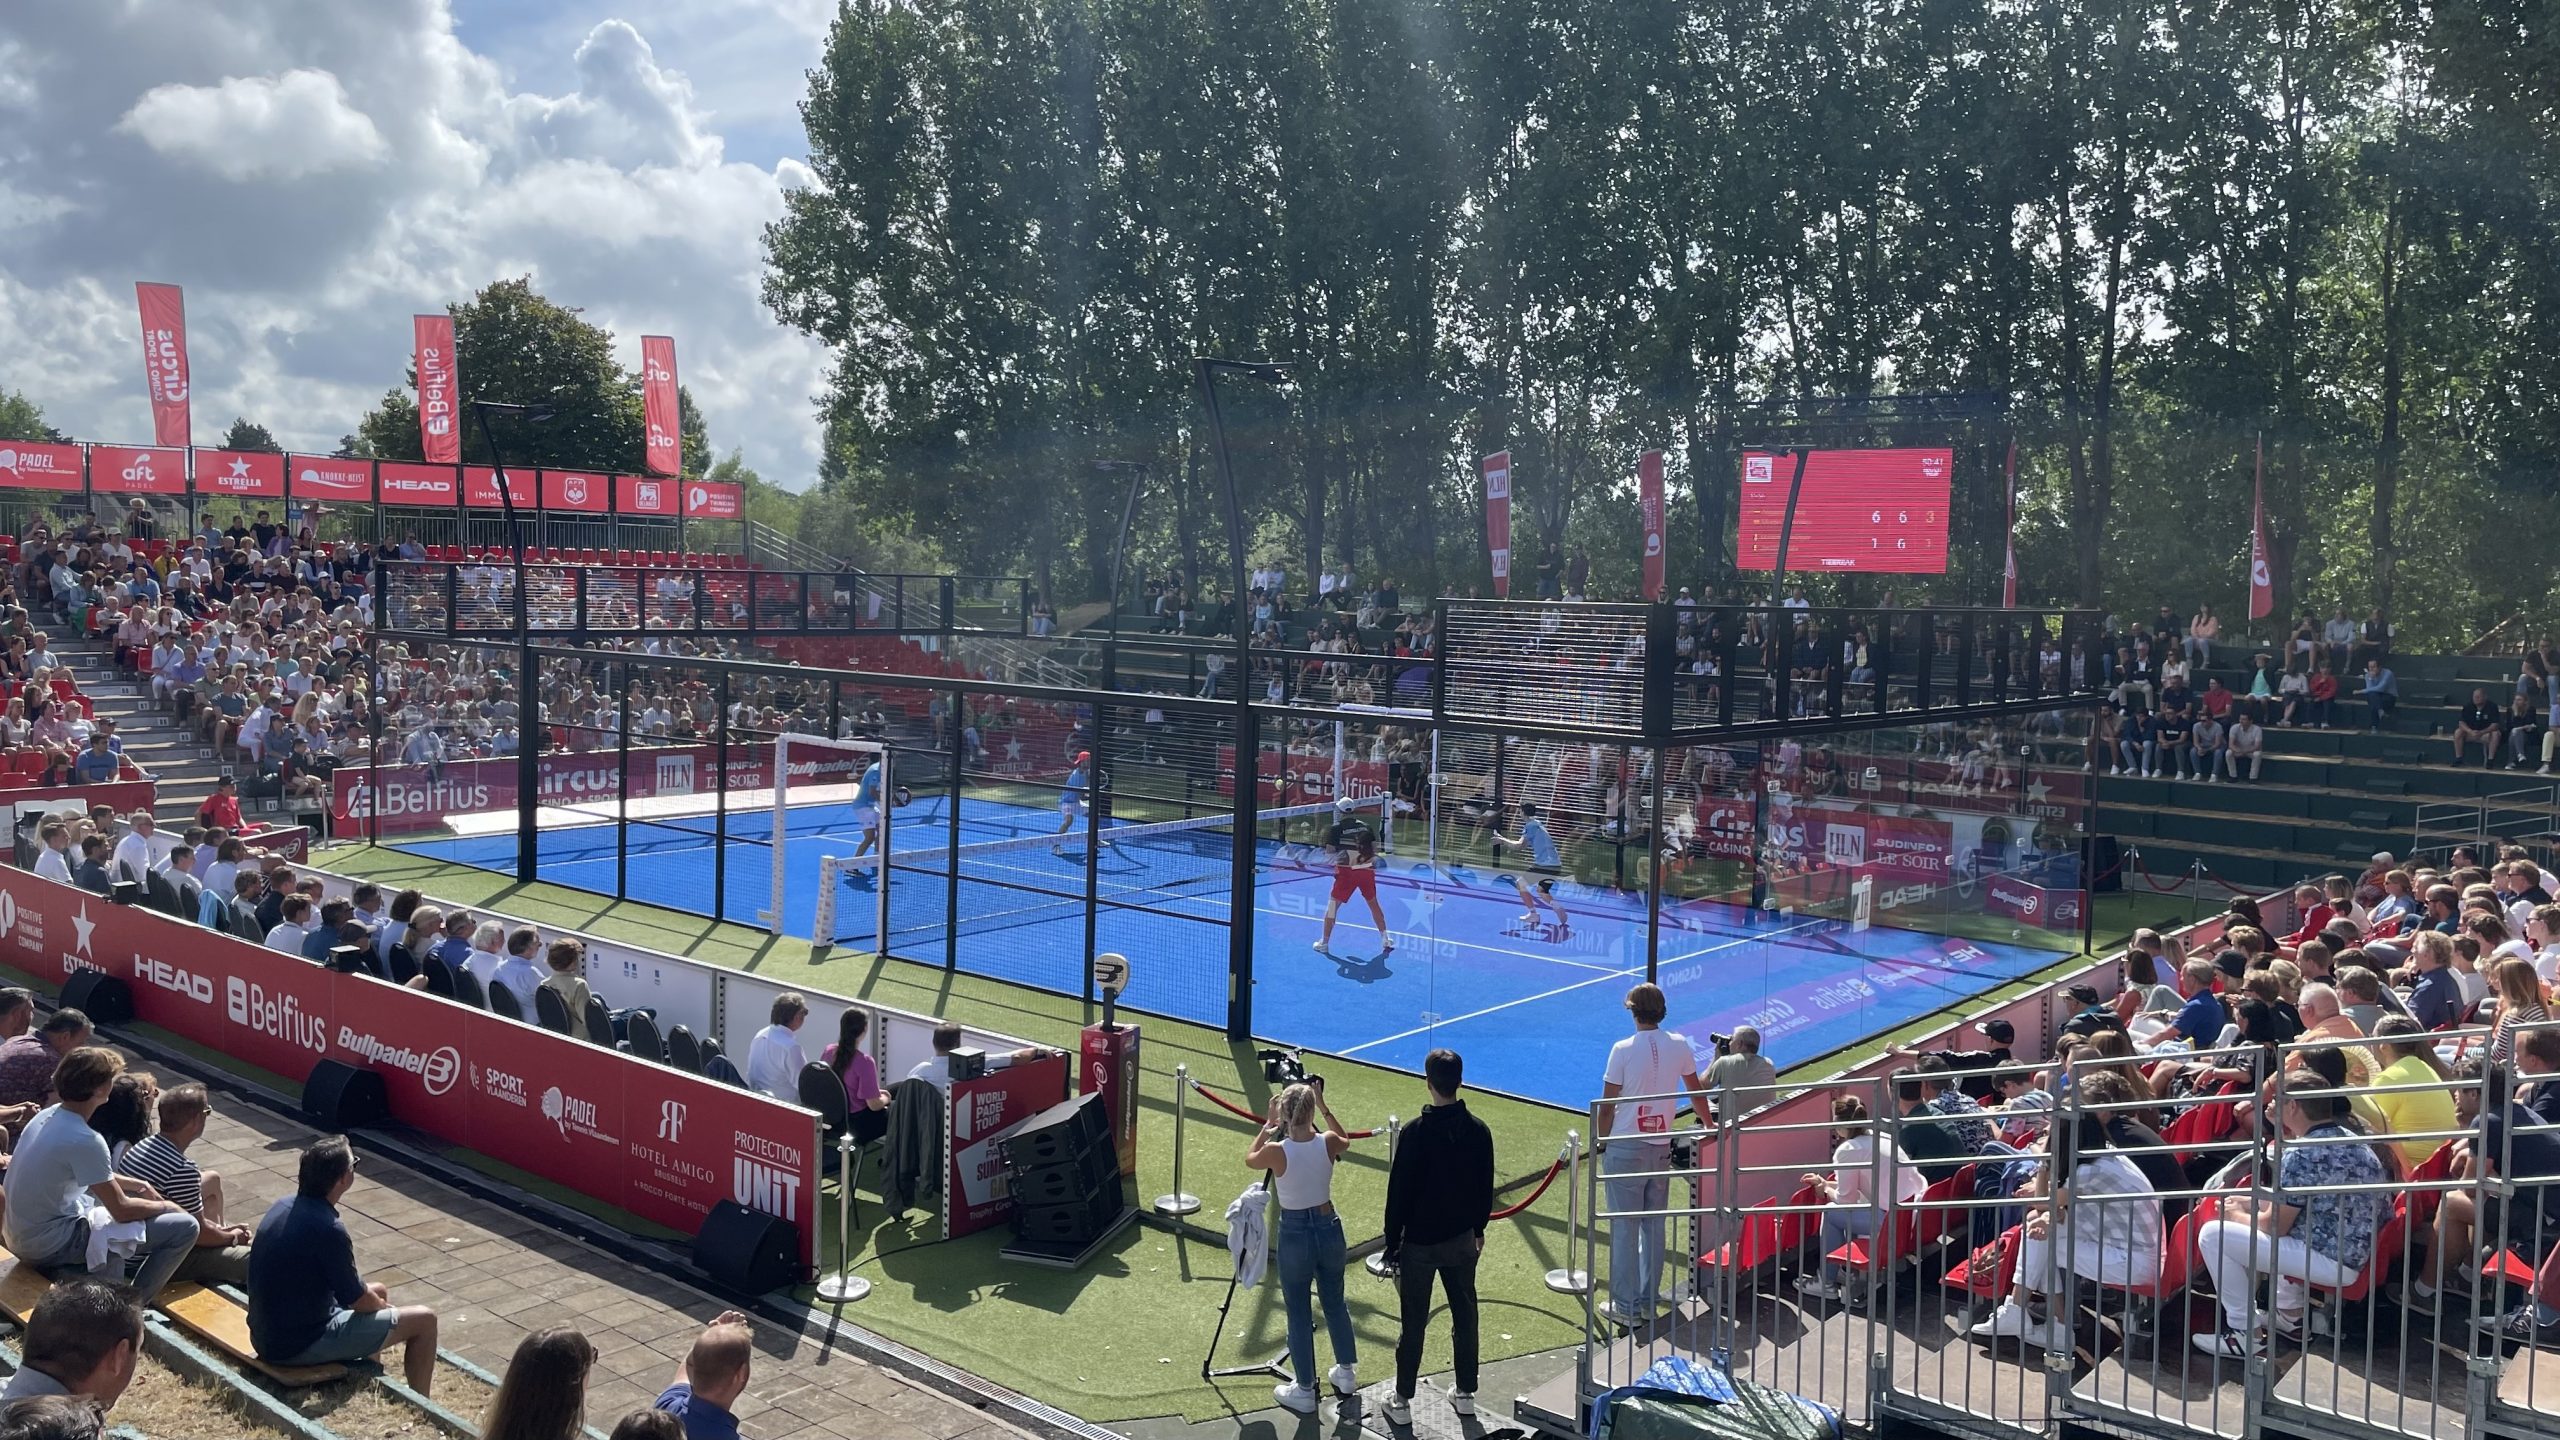 Padel and summer vibes as Belfius Summer Gala 2022 gets going